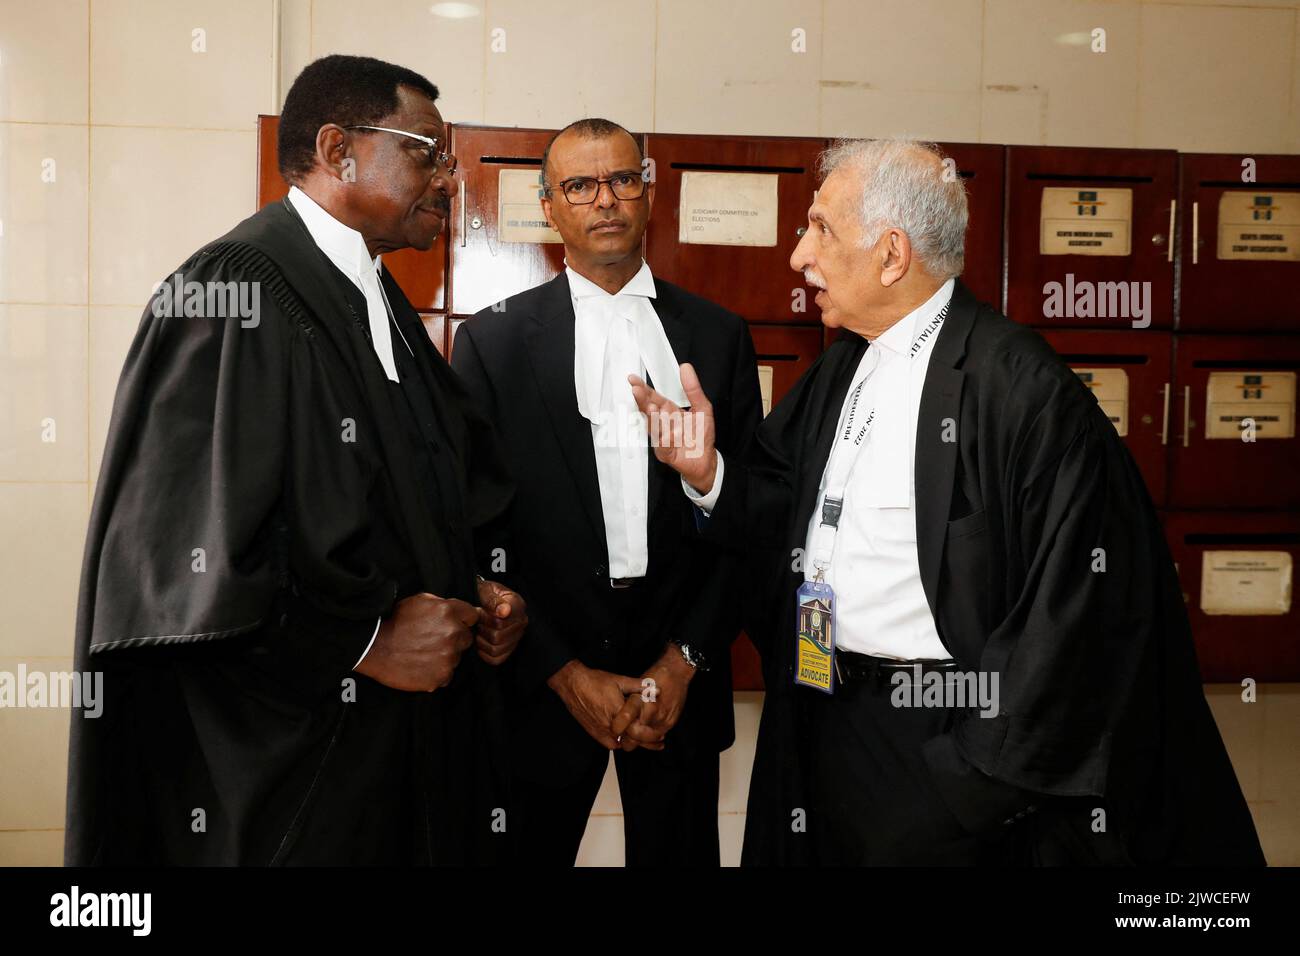 Lawyers of Kenya's opposition leader and presidential candidate Raila Odinga discuss on the day of the ruling on a petition seeking to invalidate the outcome of the recent presidential election, at the Supreme Court in Nairobi, Kenya September 5, 2022. REUTERS/Thomas Mukoya Stock Photo